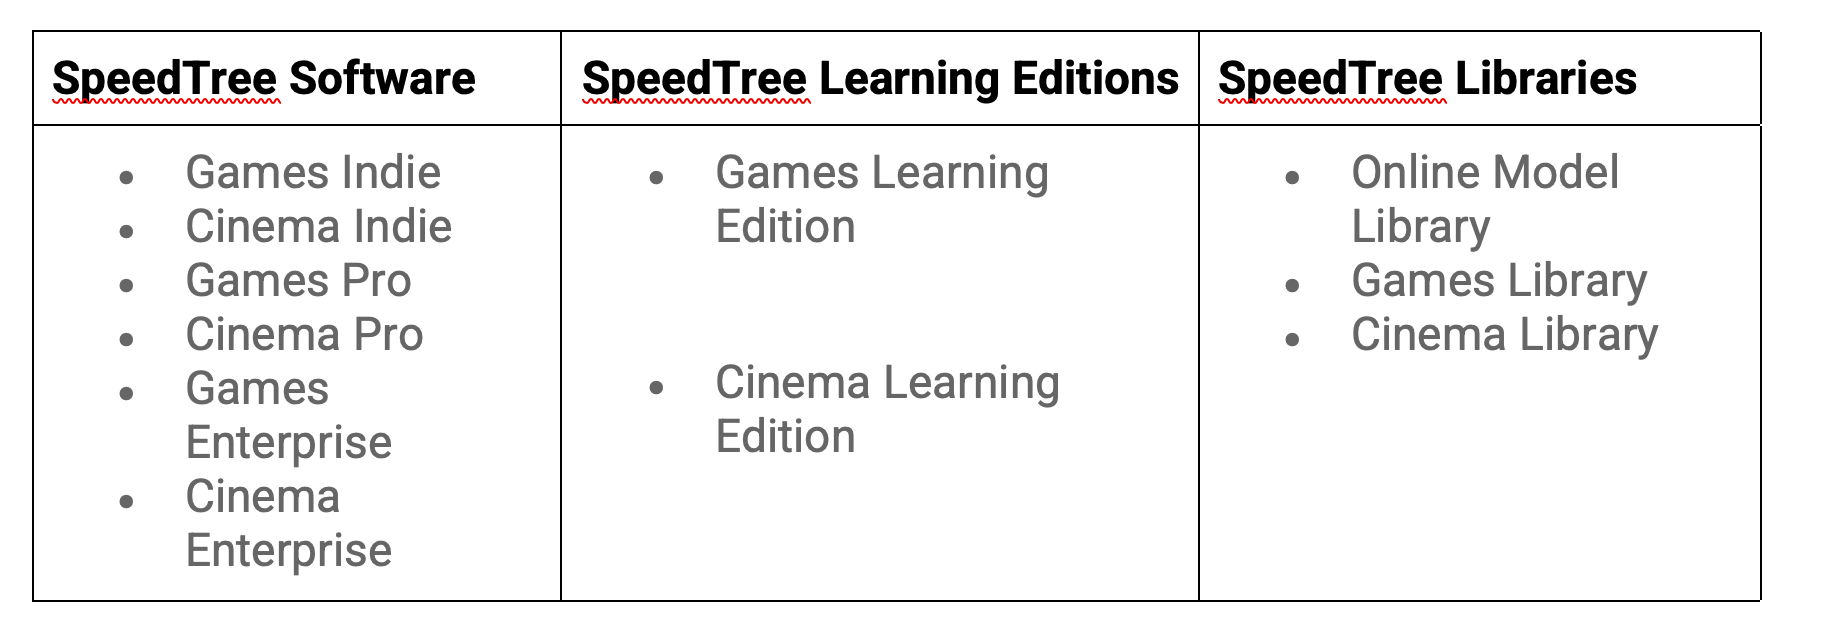 SpeedTree Software, SpeedTree Learning Editions, SpeedTree Libraries